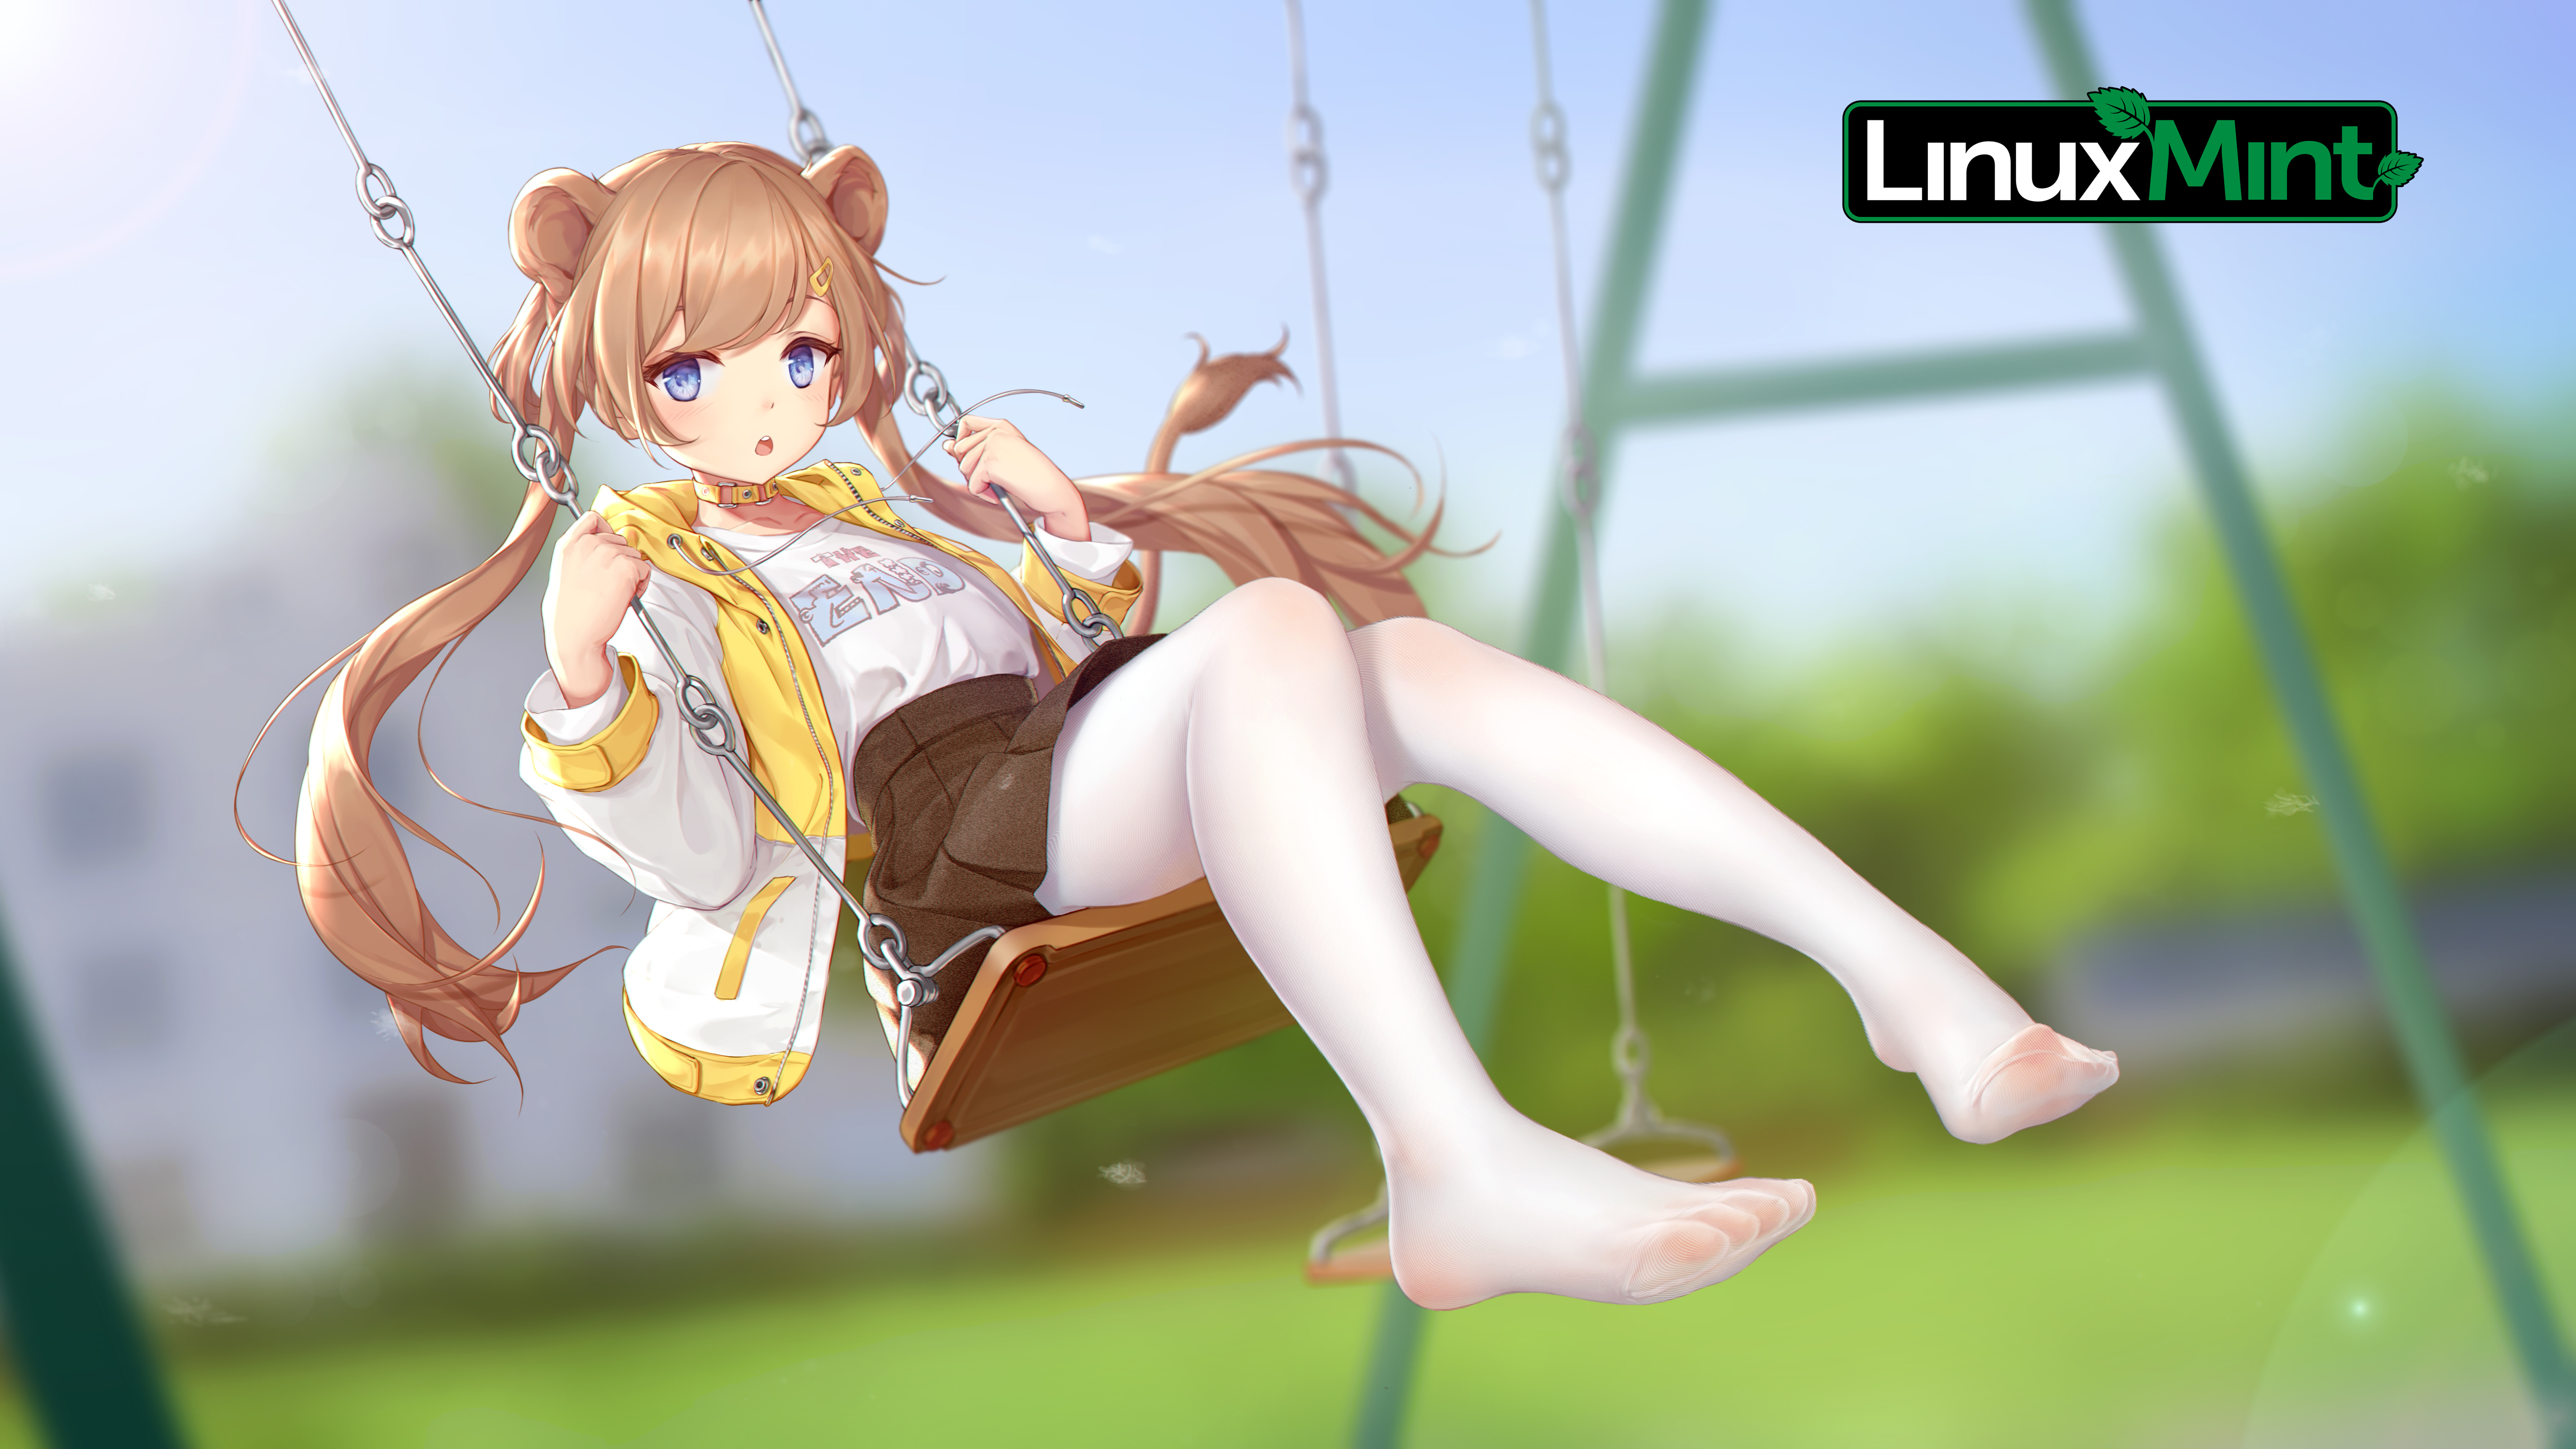 Linux Linux Mint Anime Girls Pigtails Feet Tights Blonde Nylon Stockings Anime 5139x2890